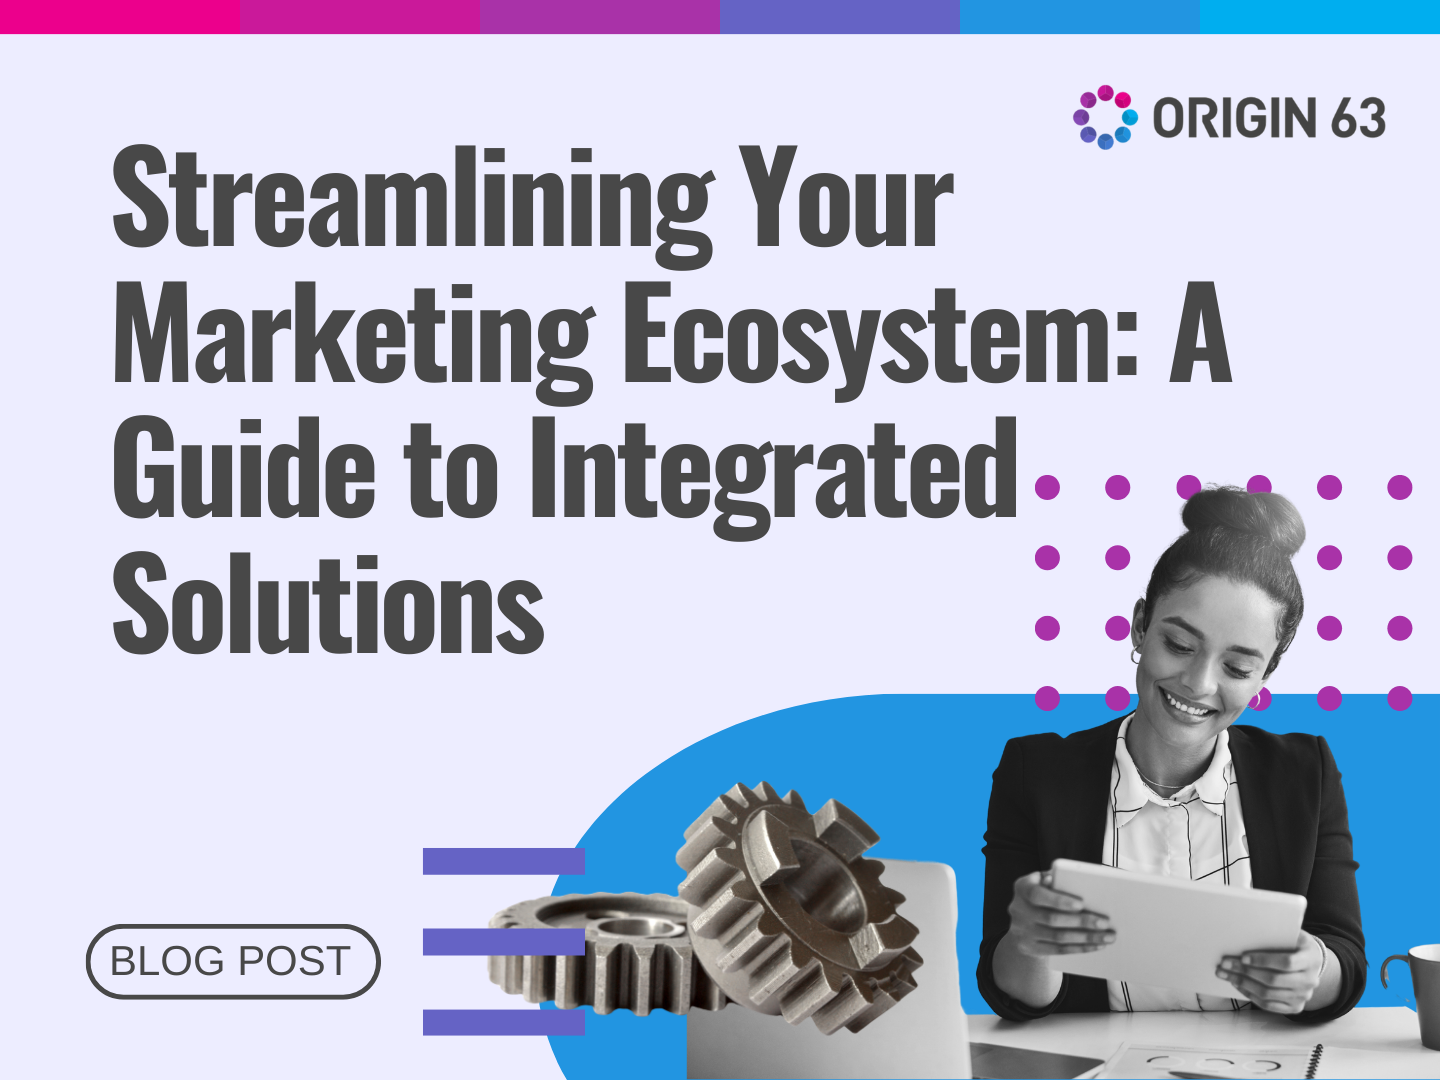 Streamline your marketing ecosystem with a unified approach.